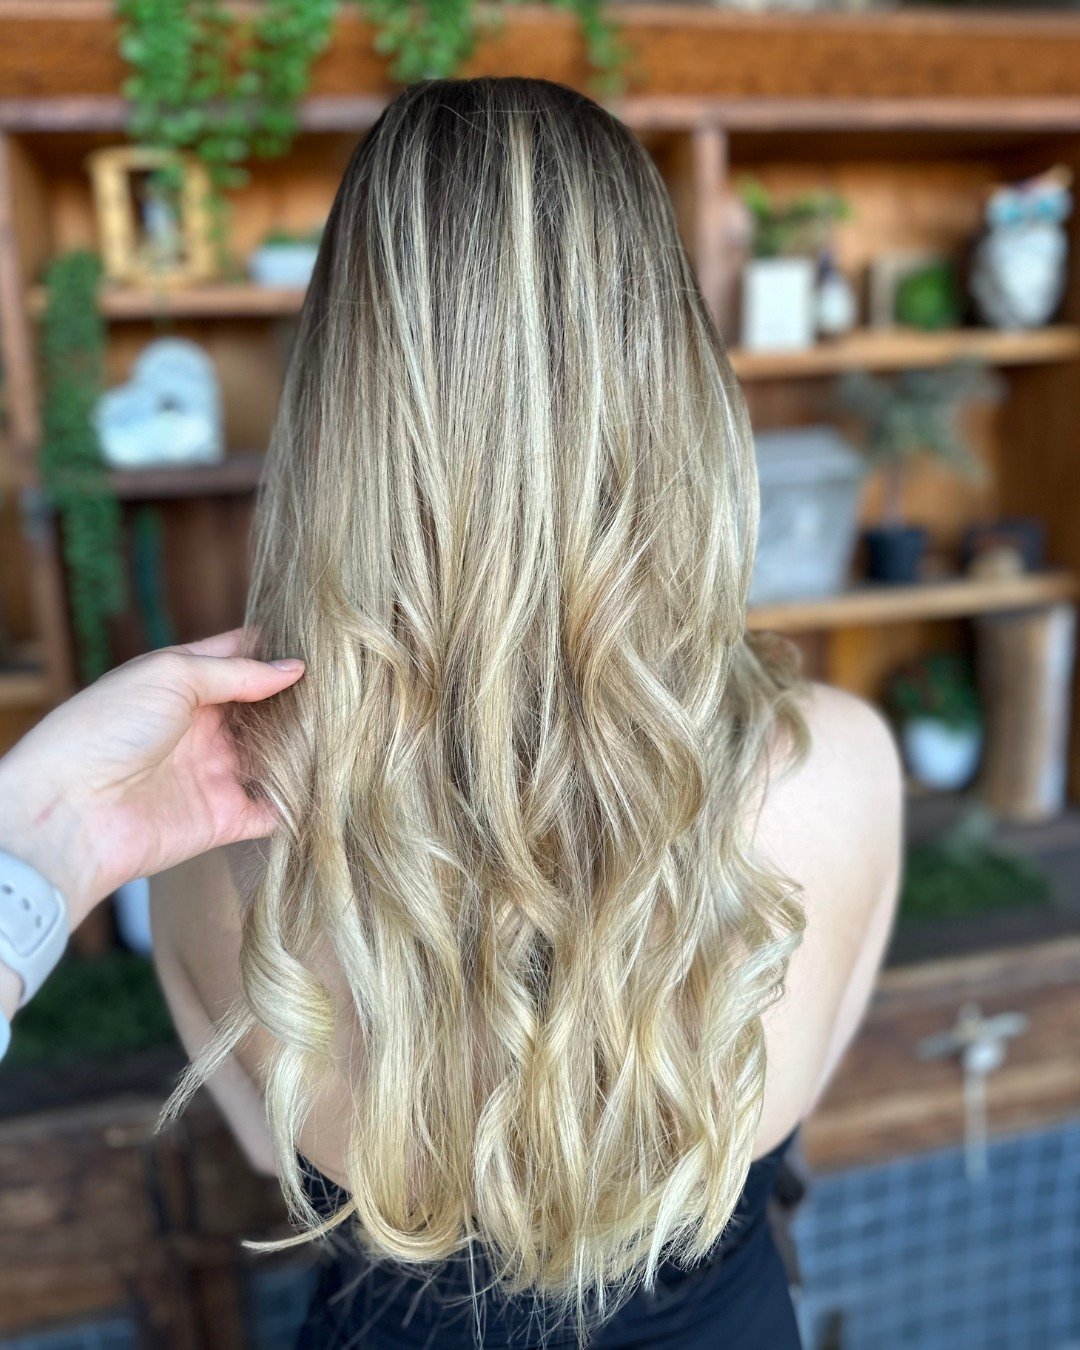 the blow dry of our dreams - styled by chloe! 😍⁠
⁠
#organicministrysalon #adelaidehairsalon #adelaideorganicsalon #lowtoxsalon #adelaidehairdresser #organicbeauty #naturalhaircare #holistichaircare #organicsalon #hairgoals⁠
⁠